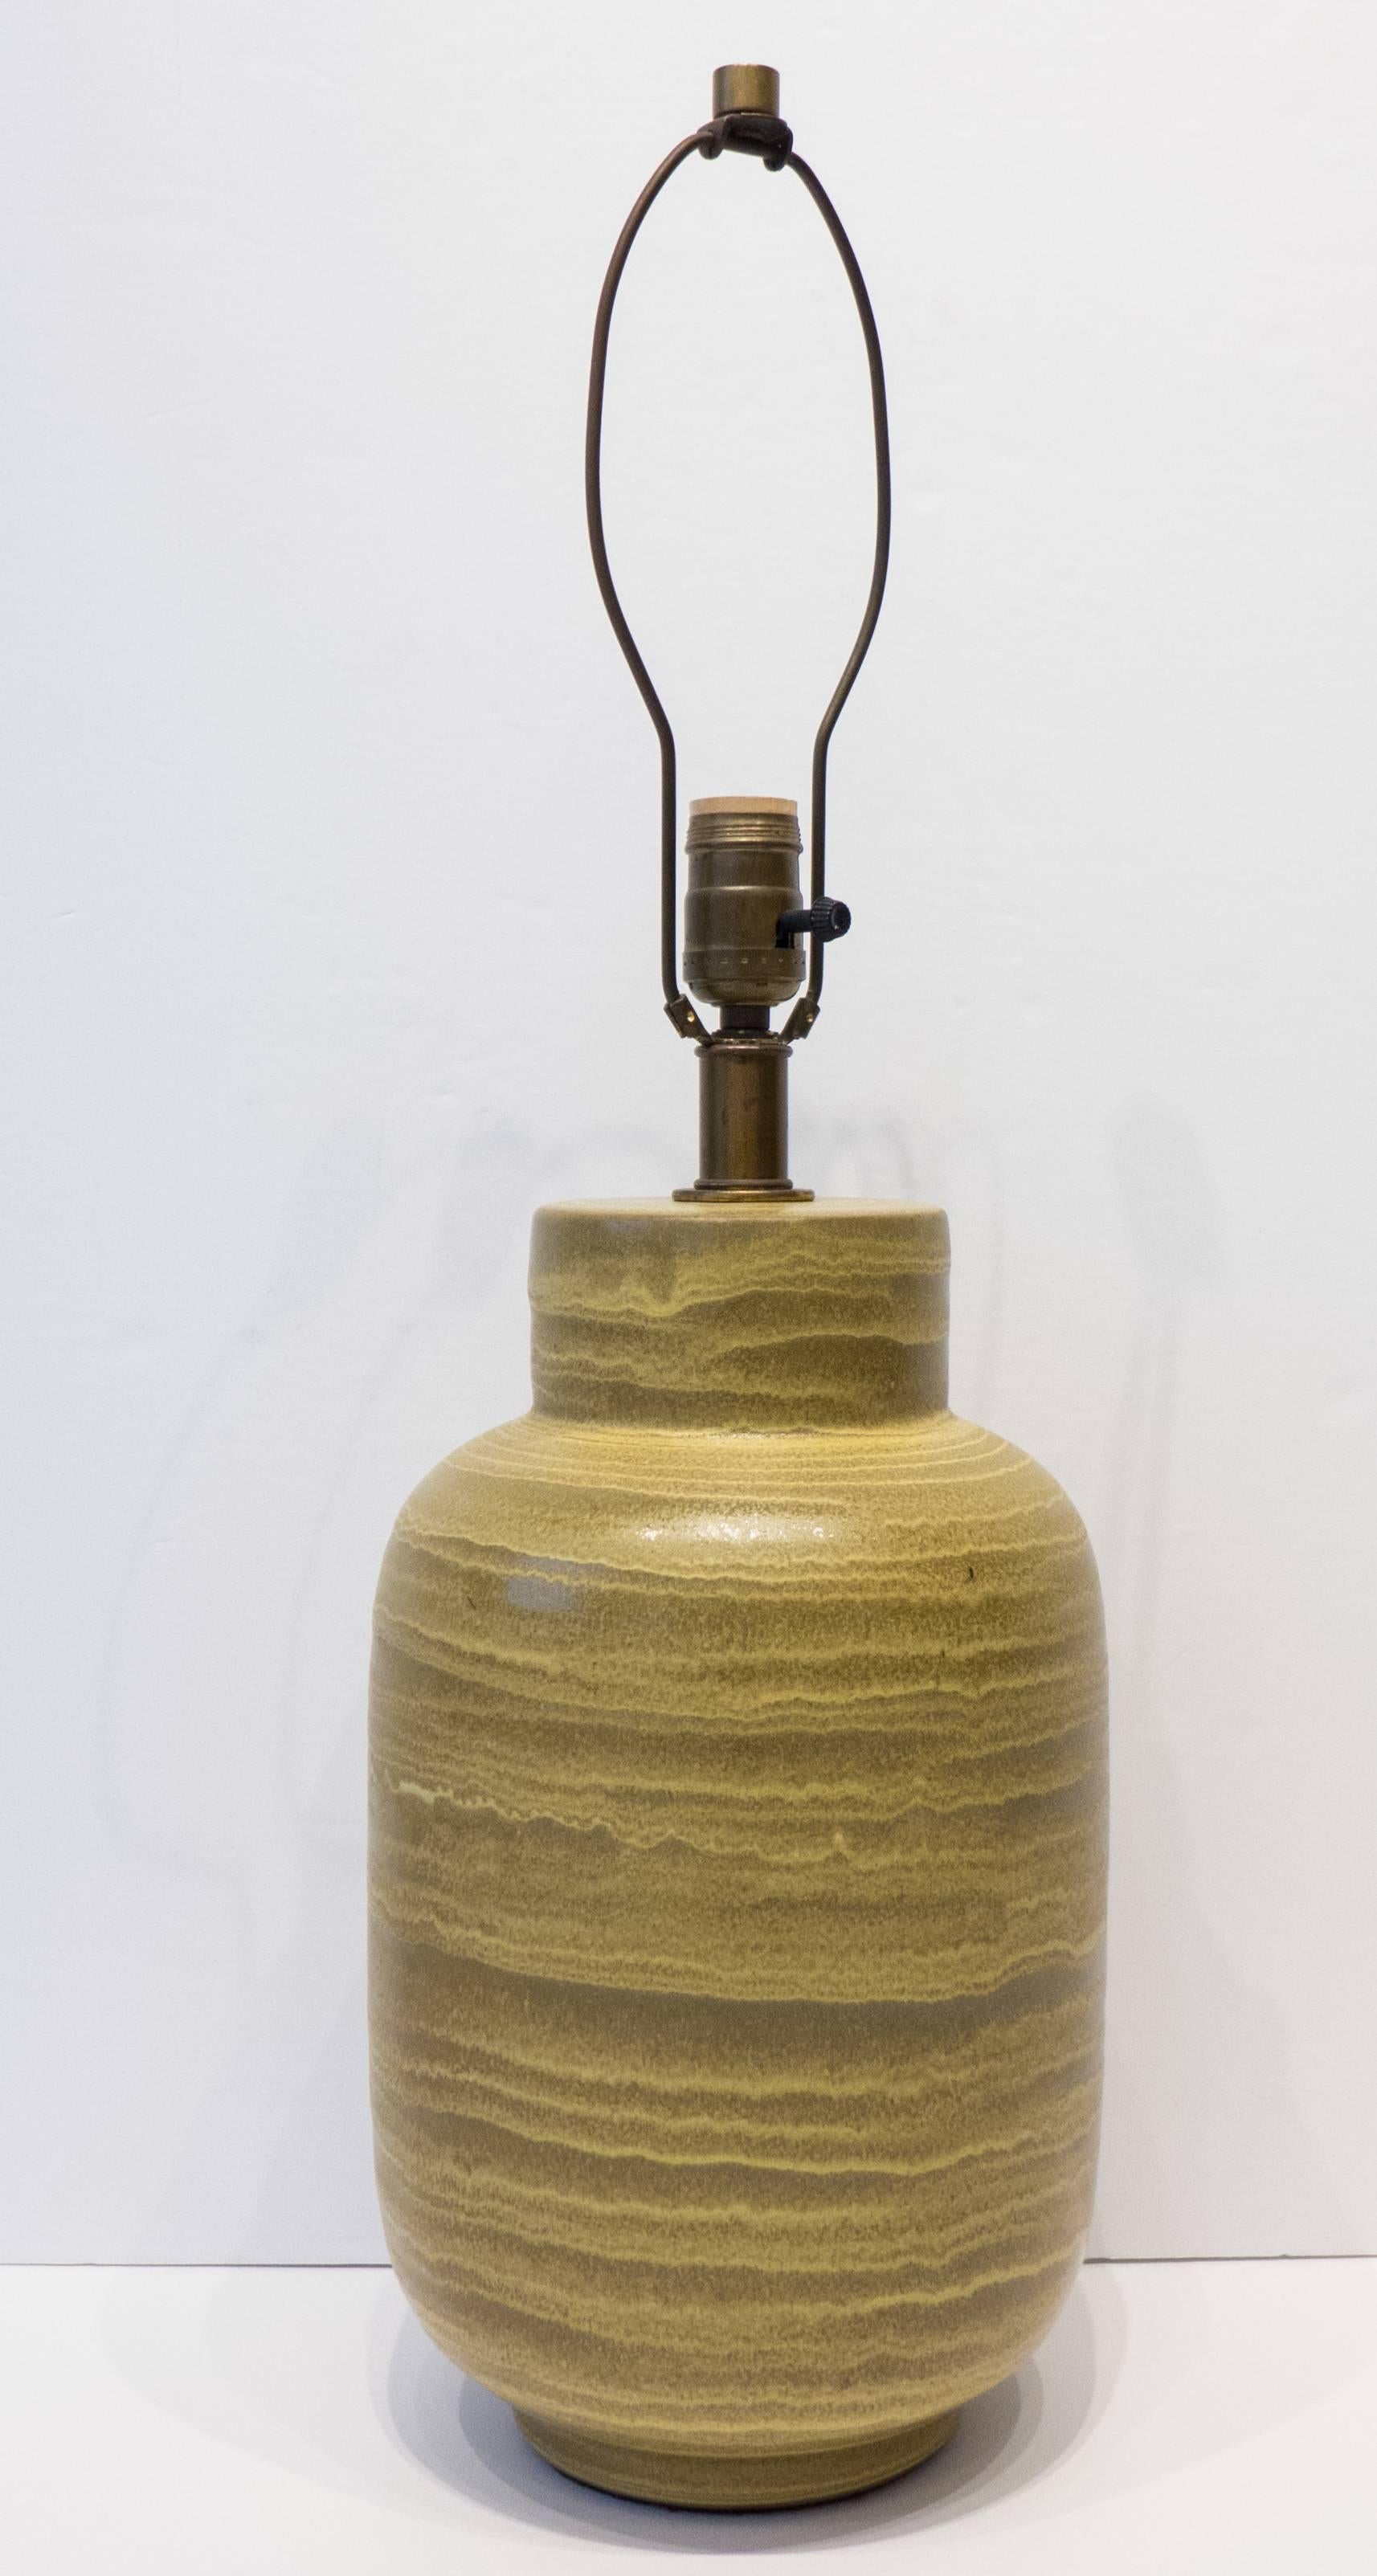 Hand-thrown stoneware lamp with a swirling matte glaze in shades of green and gold, produced by Design Technics, circa 1950s. With original brass fittings, including the finial.